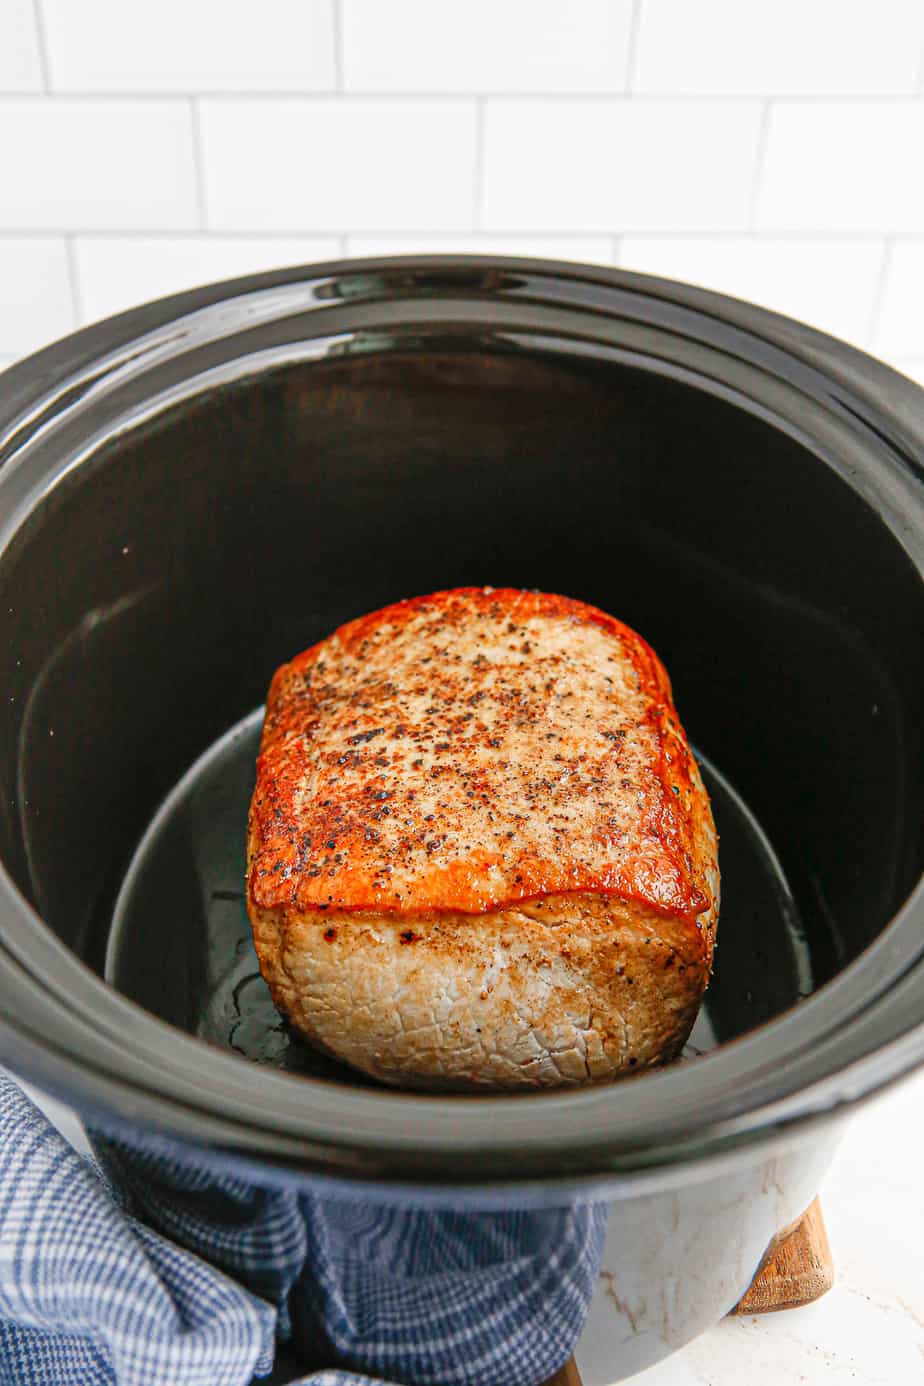 Browned and seasoned pork loin in the slow cooker with the fat side up.